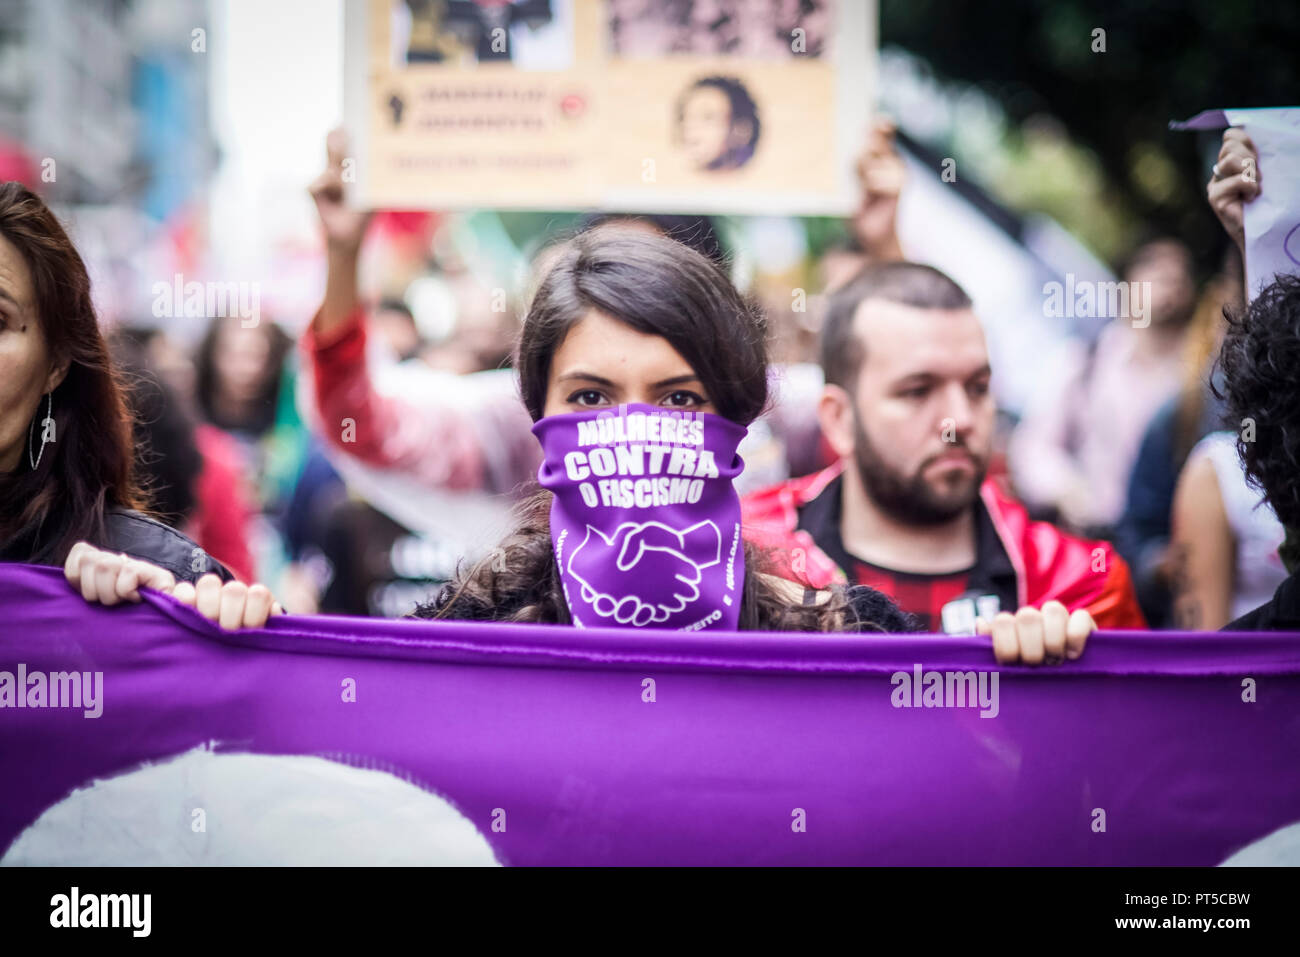 Sao Paulo, Brazil. 06th Oct, 2018. A woman wearing a scarf with the inscription "Mulheres contra o fascismo" ("Women Against Fascism") takes part in a demonstration against the extreme right-wing presidential candidate Bolsonaro. Many people in Sao Paulo took to the streets against Bolsonaro and his racist, anti-woman and anti-gay course. In the midst of a severe crisis, Latin America's largest country elects a new president. On 07.10.2018 the ultra-right Bolsonaro and the left Haddad will be the favourites in the presidential elections. Credit: Pablo Albarenga/dpa/Alamy Live News Stock Photo